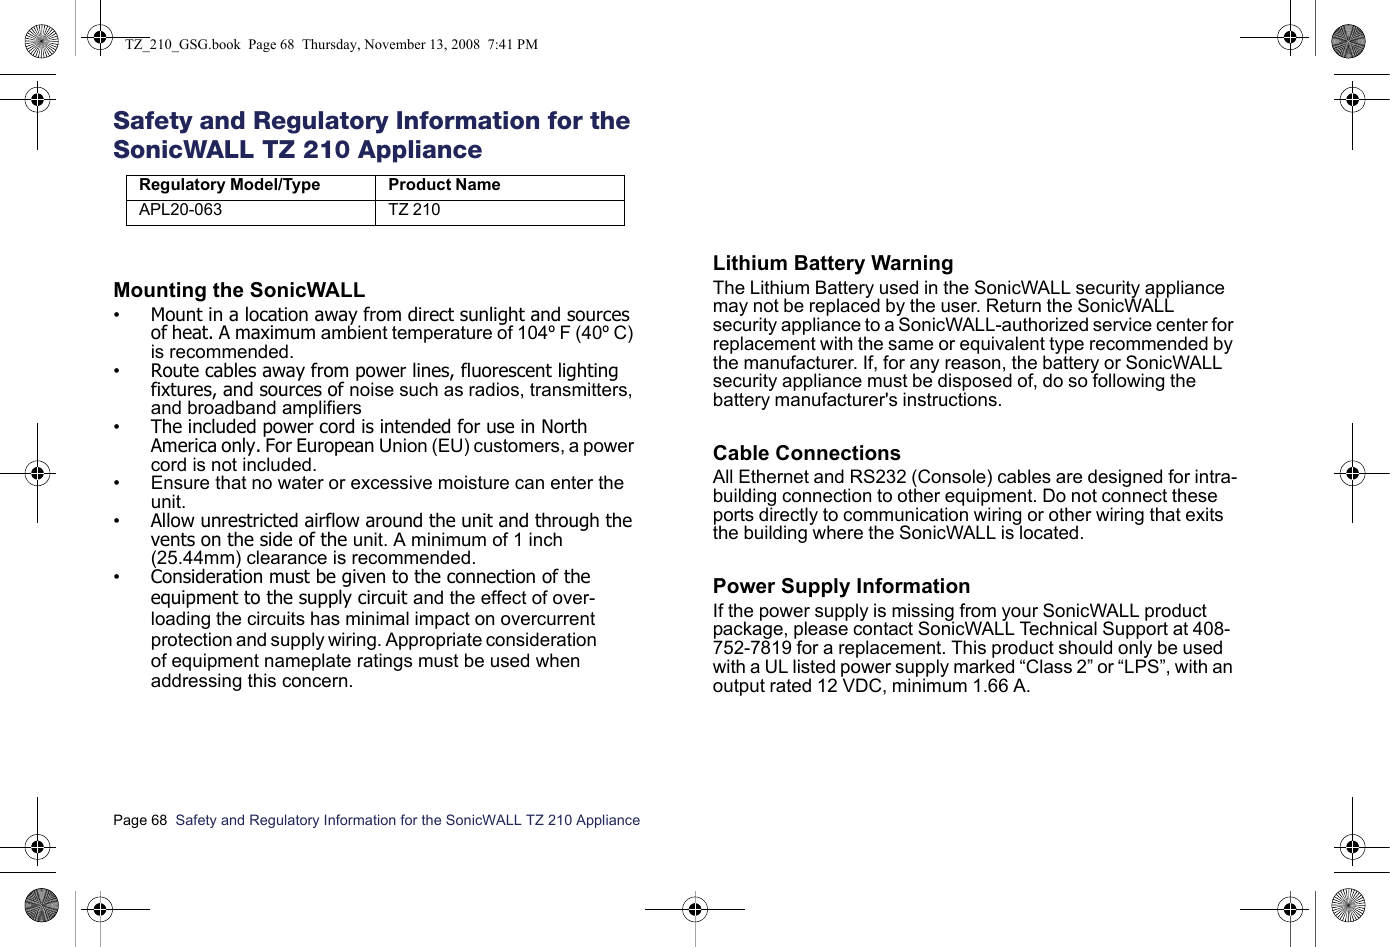 Page 68  Safety and Regulatory Information for the SonicWALL TZ 210 Appliance  Safety and Regulatory Information for the SonicWALL TZ 210 ApplianceMounting the SonicWALL•Mount in a location away from direct sunlight and sources of heat. A maximum ambient temperature of 104º F (40º C) is recommended.•Route cables away from power lines, fluorescent lighting fixtures, and sources of noise such as radios, transmitters, and broadband amplifiers•The included power cord is intended for use in North America only. For European Union (EU) customers, a power cord is not included.• Ensure that no water or excessive moisture can enter the unit.•Allow unrestricted airflow around the unit and through the vents on the side of the unit. A minimum of 1 inch (25.44mm) clearance is recommended.•Consideration must be given to the connection of the equipment to the supply circuit and the effect of over-loading the circuits has minimal impact on overcurrent protection and supply wiring. Appropriate consideration of equipment nameplate ratings must be used when addressing this concern.Lithium Battery WarningThe Lithium Battery used in the SonicWALL security appliance may not be replaced by the user. Return the SonicWALL security appliance to a SonicWALL-authorized service center for replacement with the same or equivalent type recommended by the manufacturer. If, for any reason, the battery or SonicWALL security appliance must be disposed of, do so following the battery manufacturer&apos;s instructions.Cable ConnectionsAll Ethernet and RS232 (Console) cables are designed for intra-building connection to other equipment. Do not connect these ports directly to communication wiring or other wiring that exits the building where the SonicWALL is located. Power Supply InformationIf the power supply is missing from your SonicWALL product package, please contact SonicWALL Technical Support at 408-752-7819 for a replacement. This product should only be used with a UL listed power supply marked “Class 2” or “LPS”, with an output rated 12 VDC, minimum 1.66 A.Regulatory Model/Type Product NameAPL20-063 TZ 210 TZ_210_GSG.book  Page 68  Thursday, November 13, 2008  7:41 PM